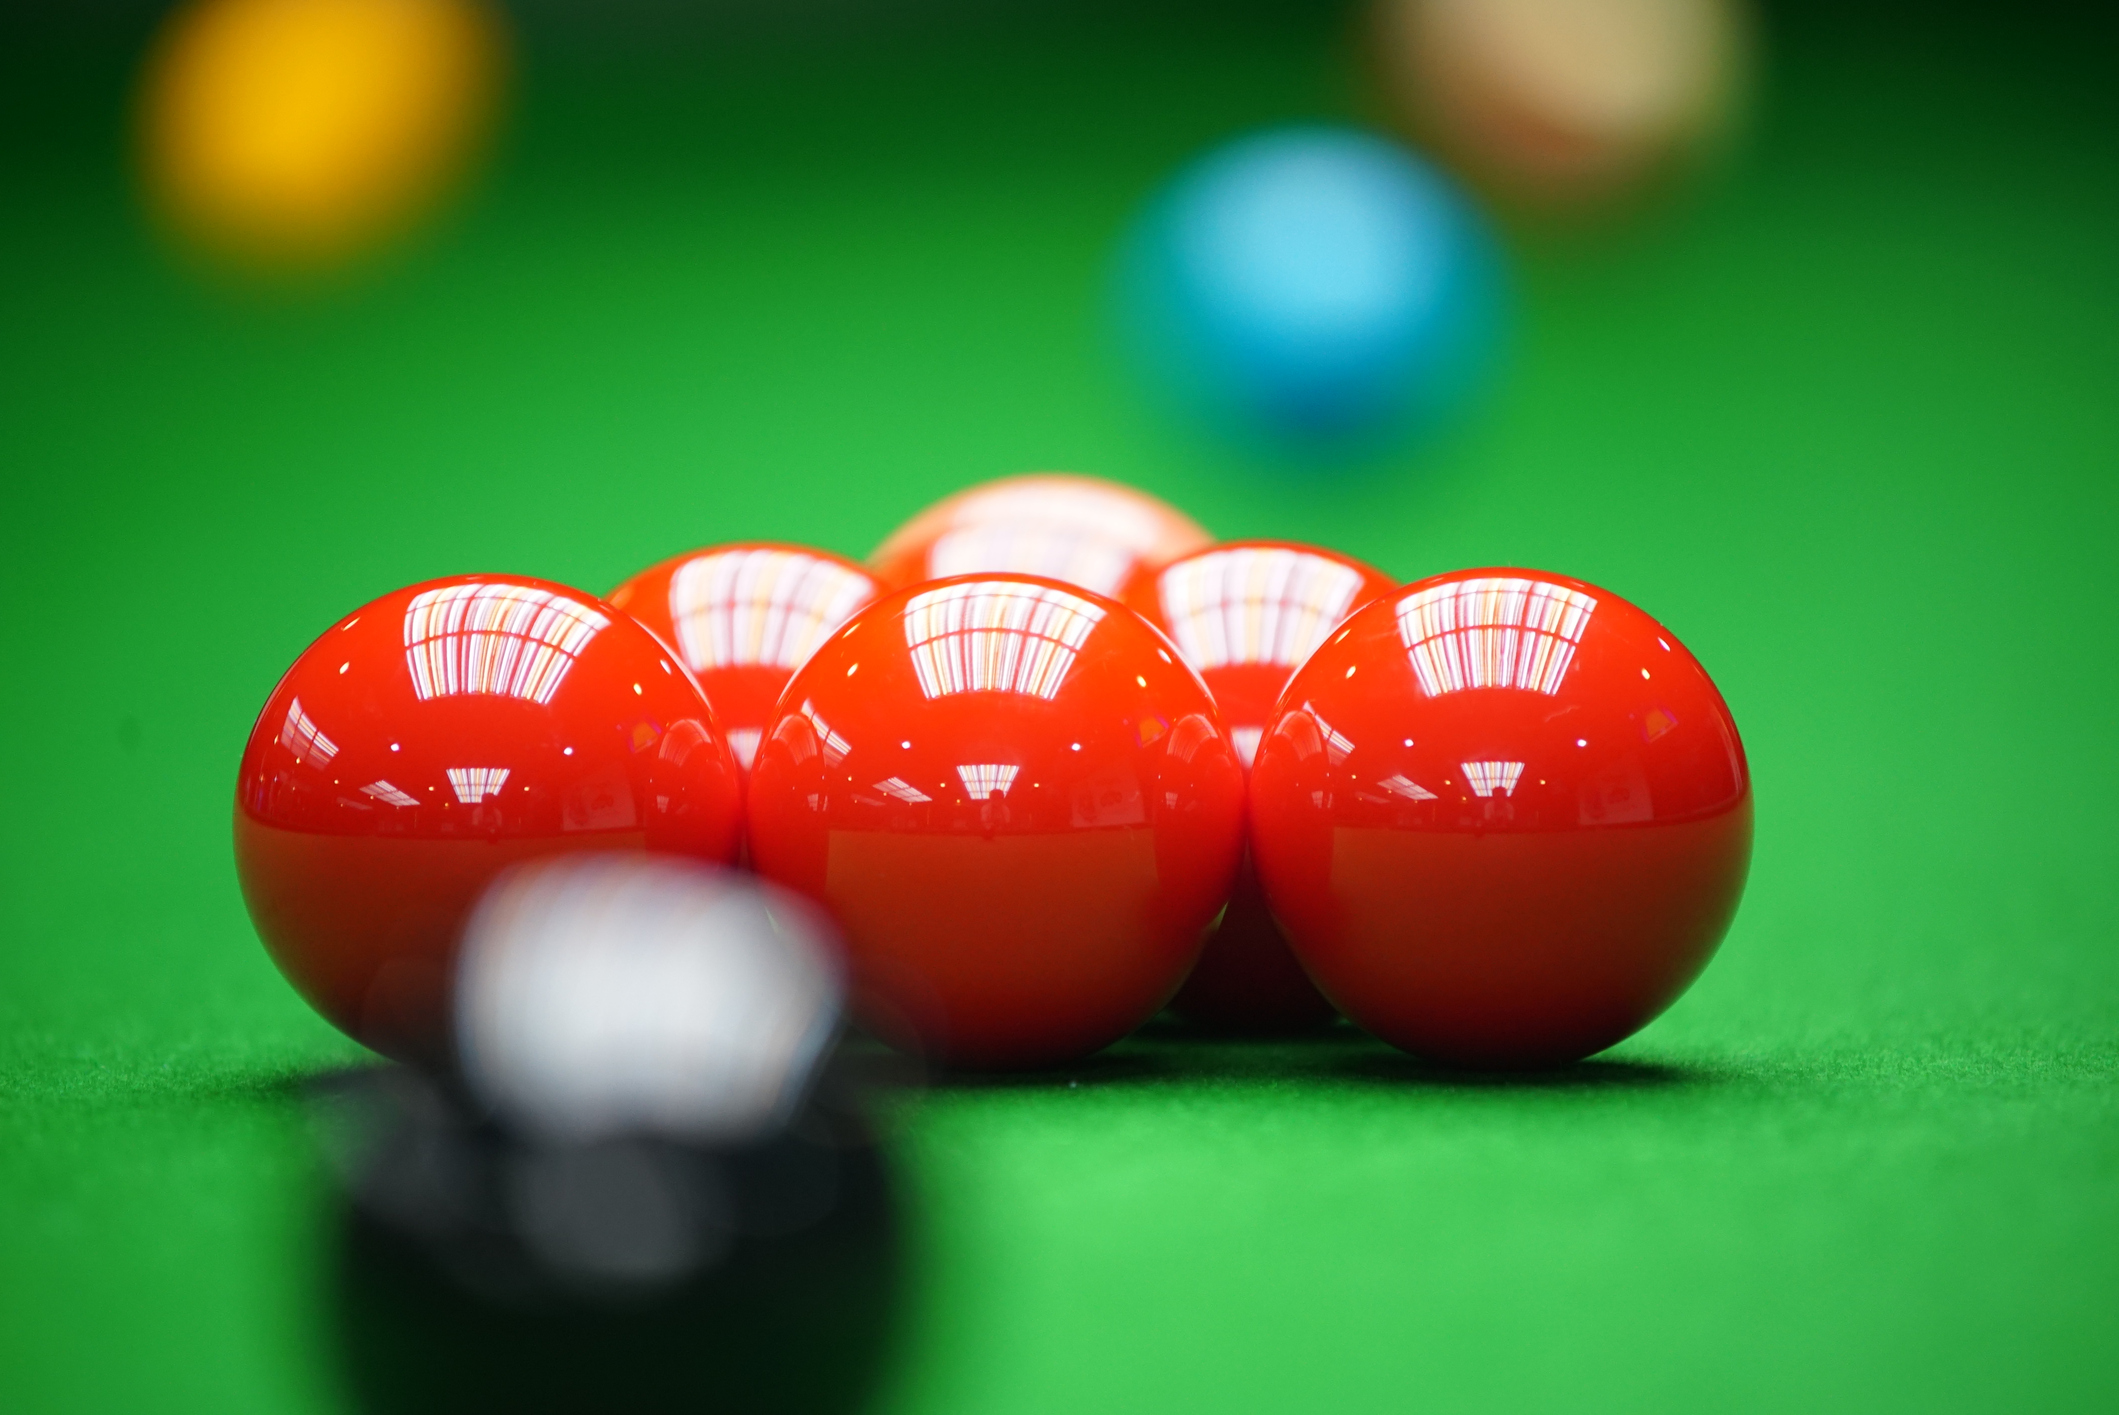 Yan Bingtao the latest snooker player to be suspended in match-fixing probe EGR Intel B2B information for the global online gambling and gaming industry